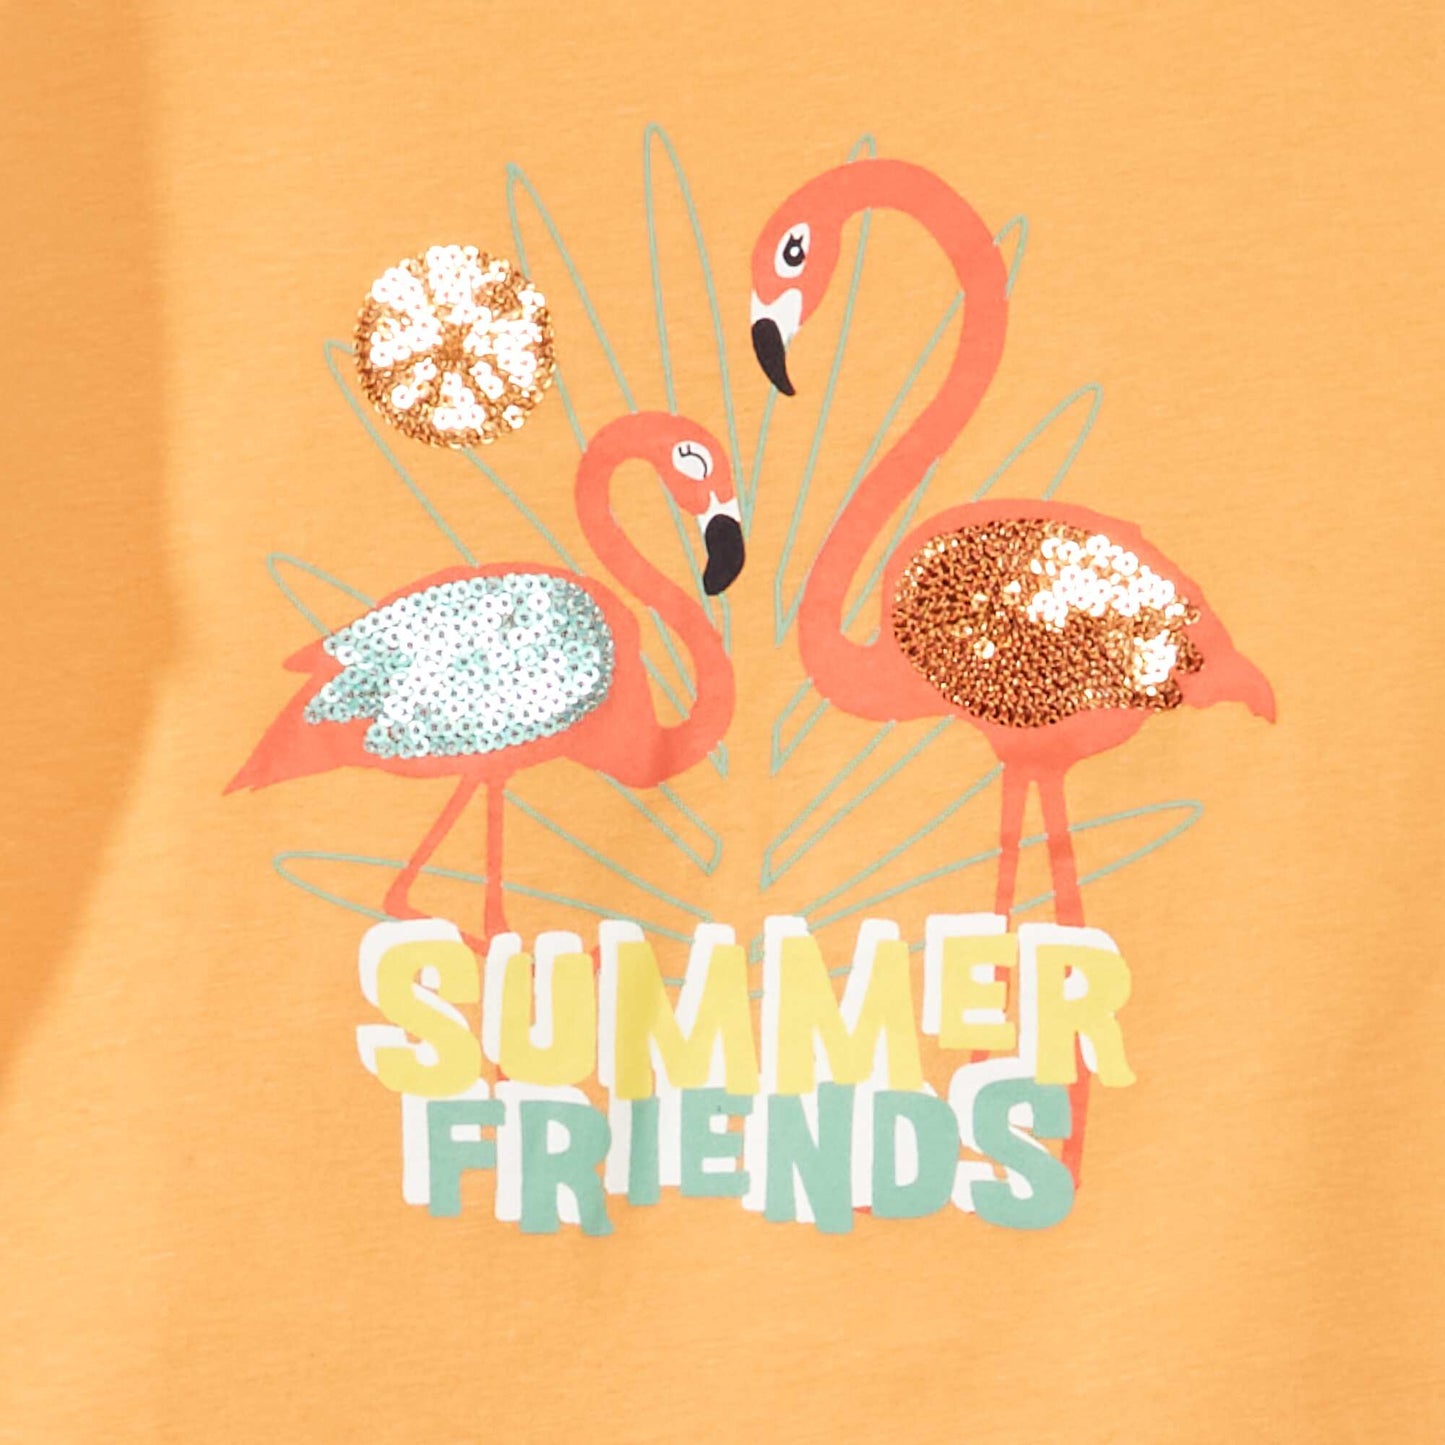 Jersey T-shirt with cute patterns ORANGE